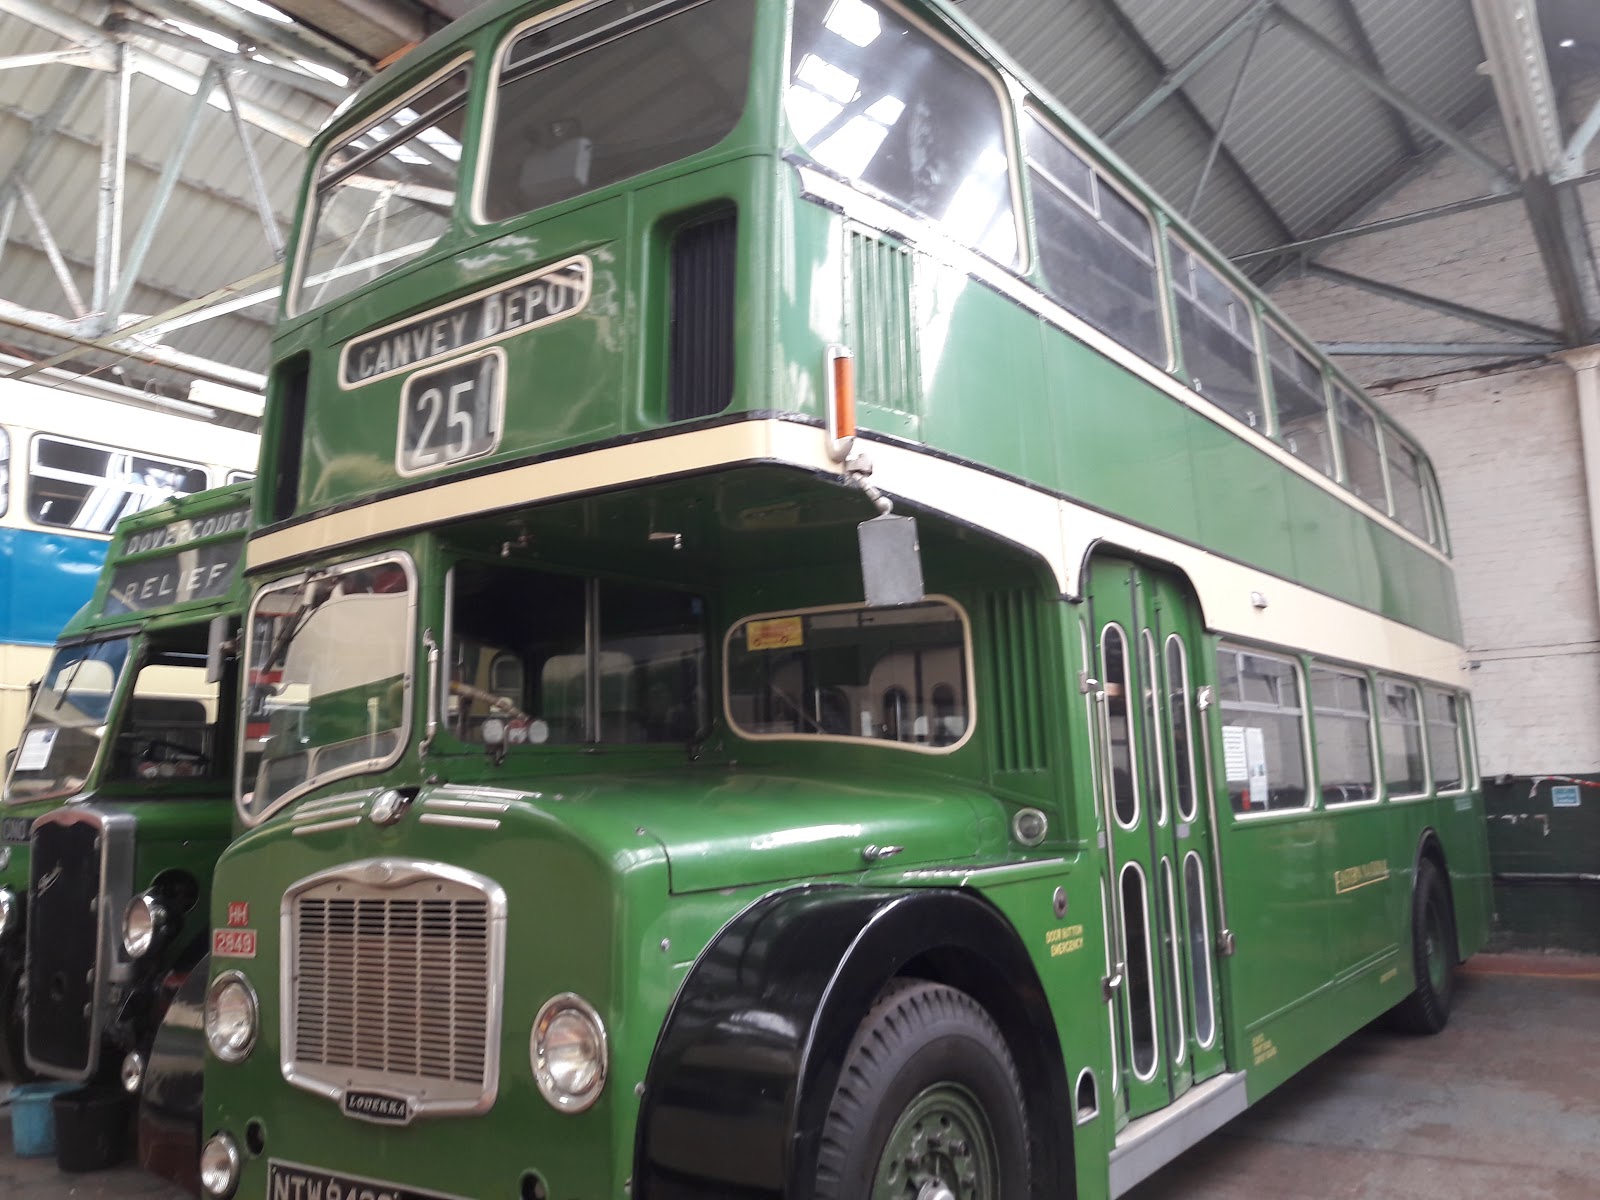 https://whatremovals.co.uk/wp-content/uploads/2022/02/Canvey Island Transport Museum-300x225.jpeg